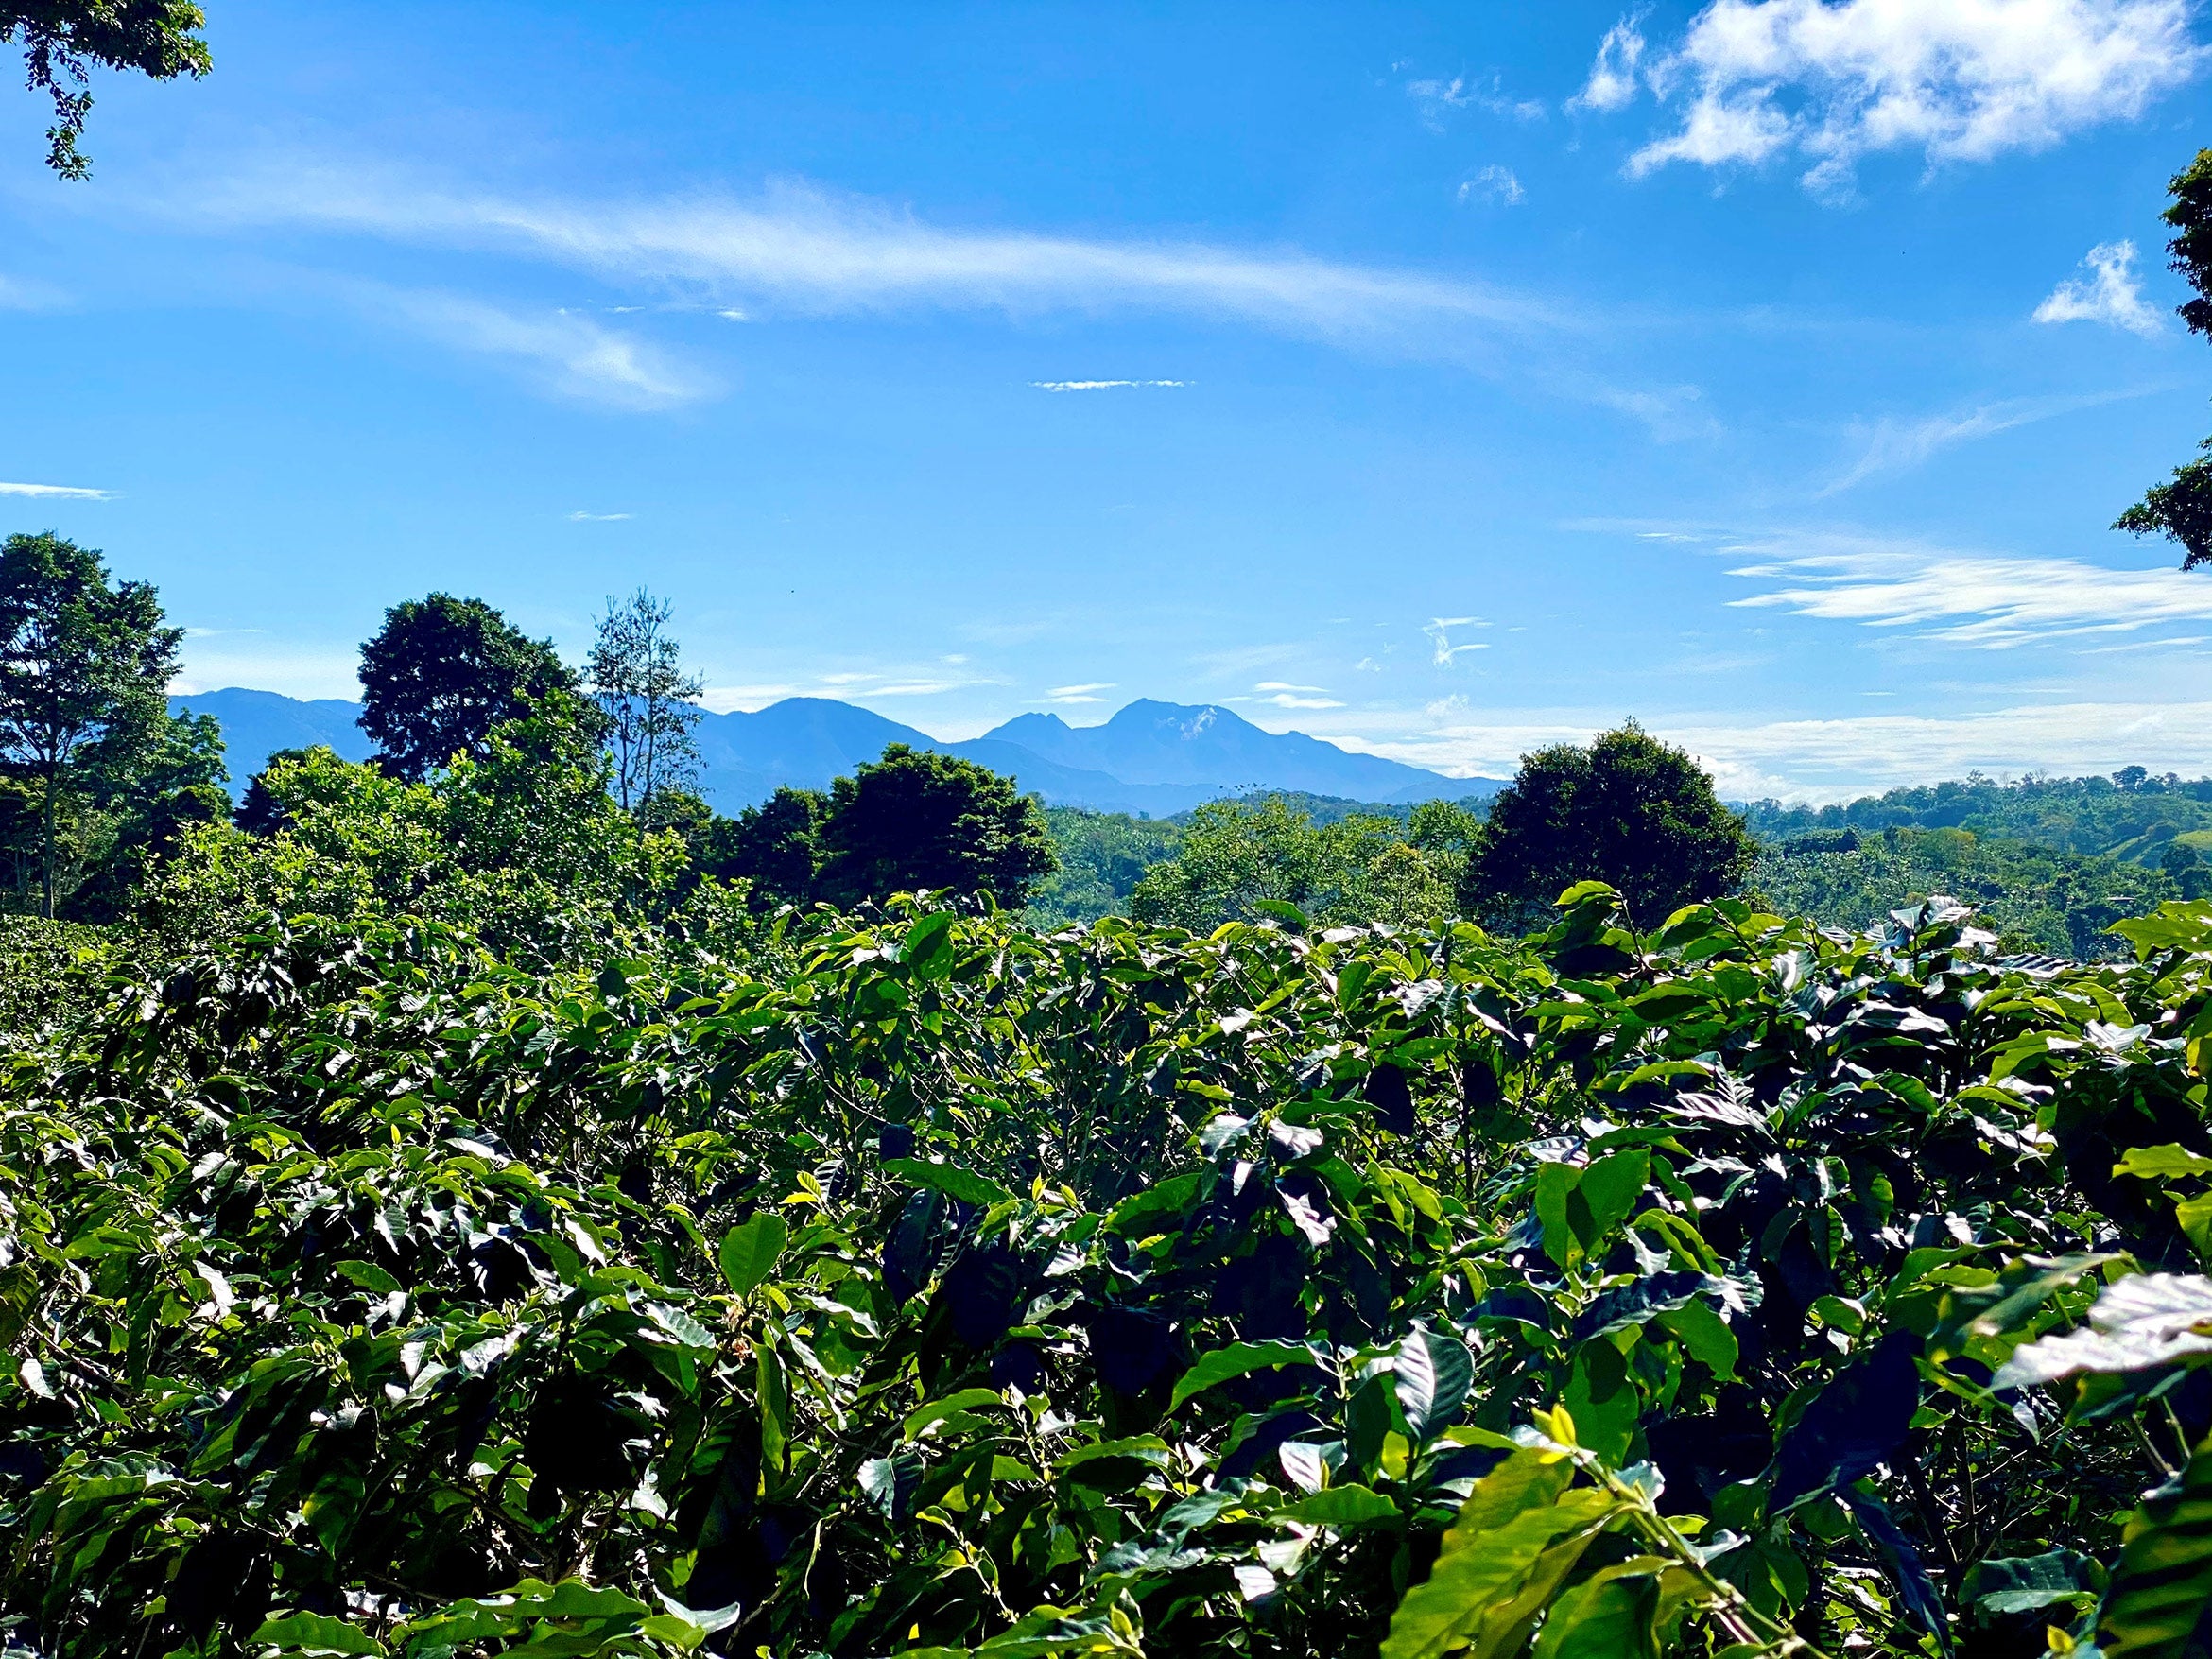 costa rican coffee plantation surrounded by trees and hills in the background